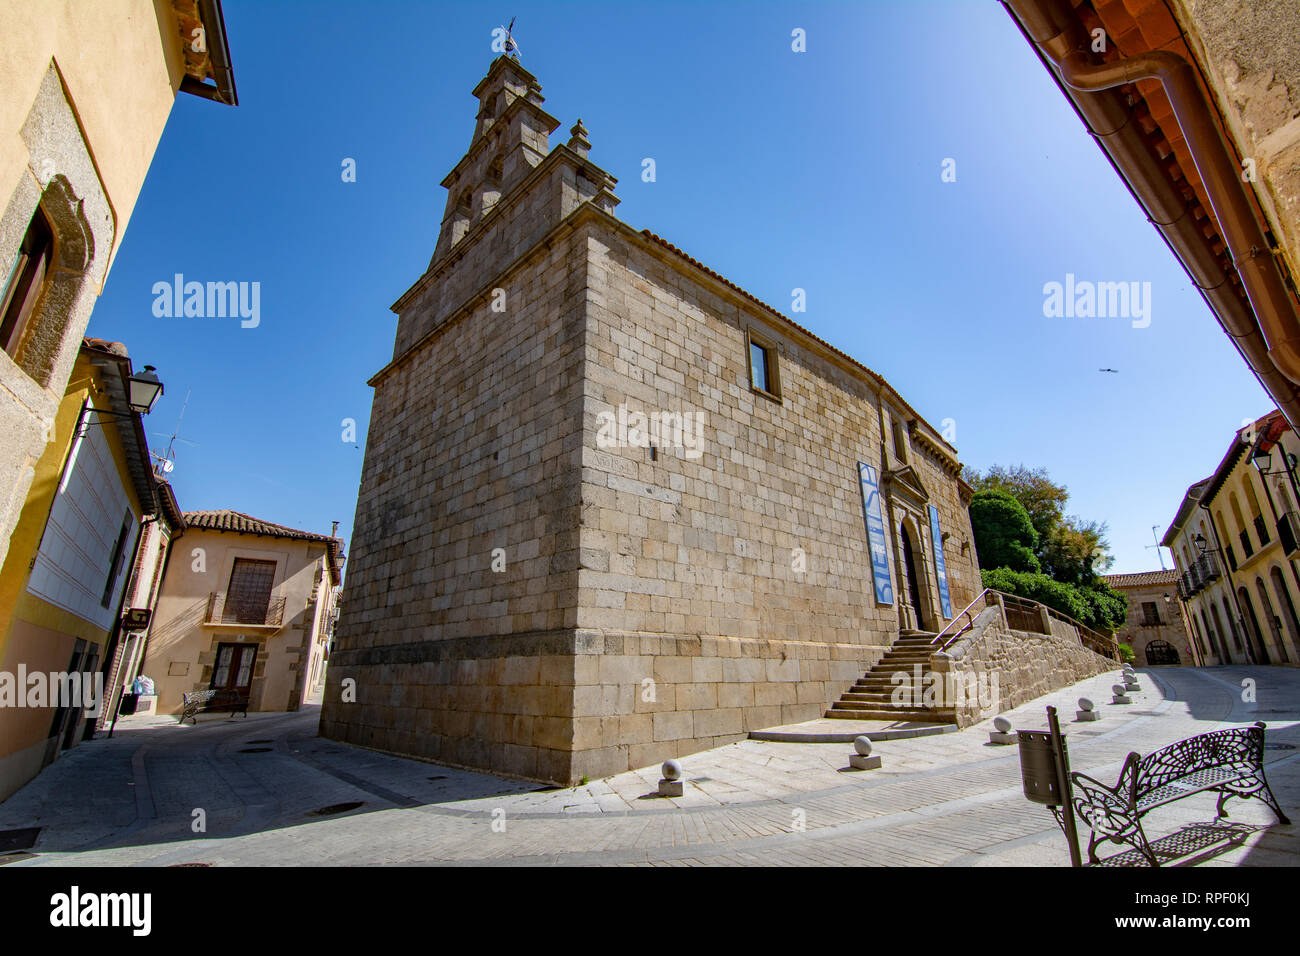 Ledesma, Salamanca, Spain; June 2017: view of the church of San Miguel in the historic centre of the medieval town of Ledesma. Stock Photo